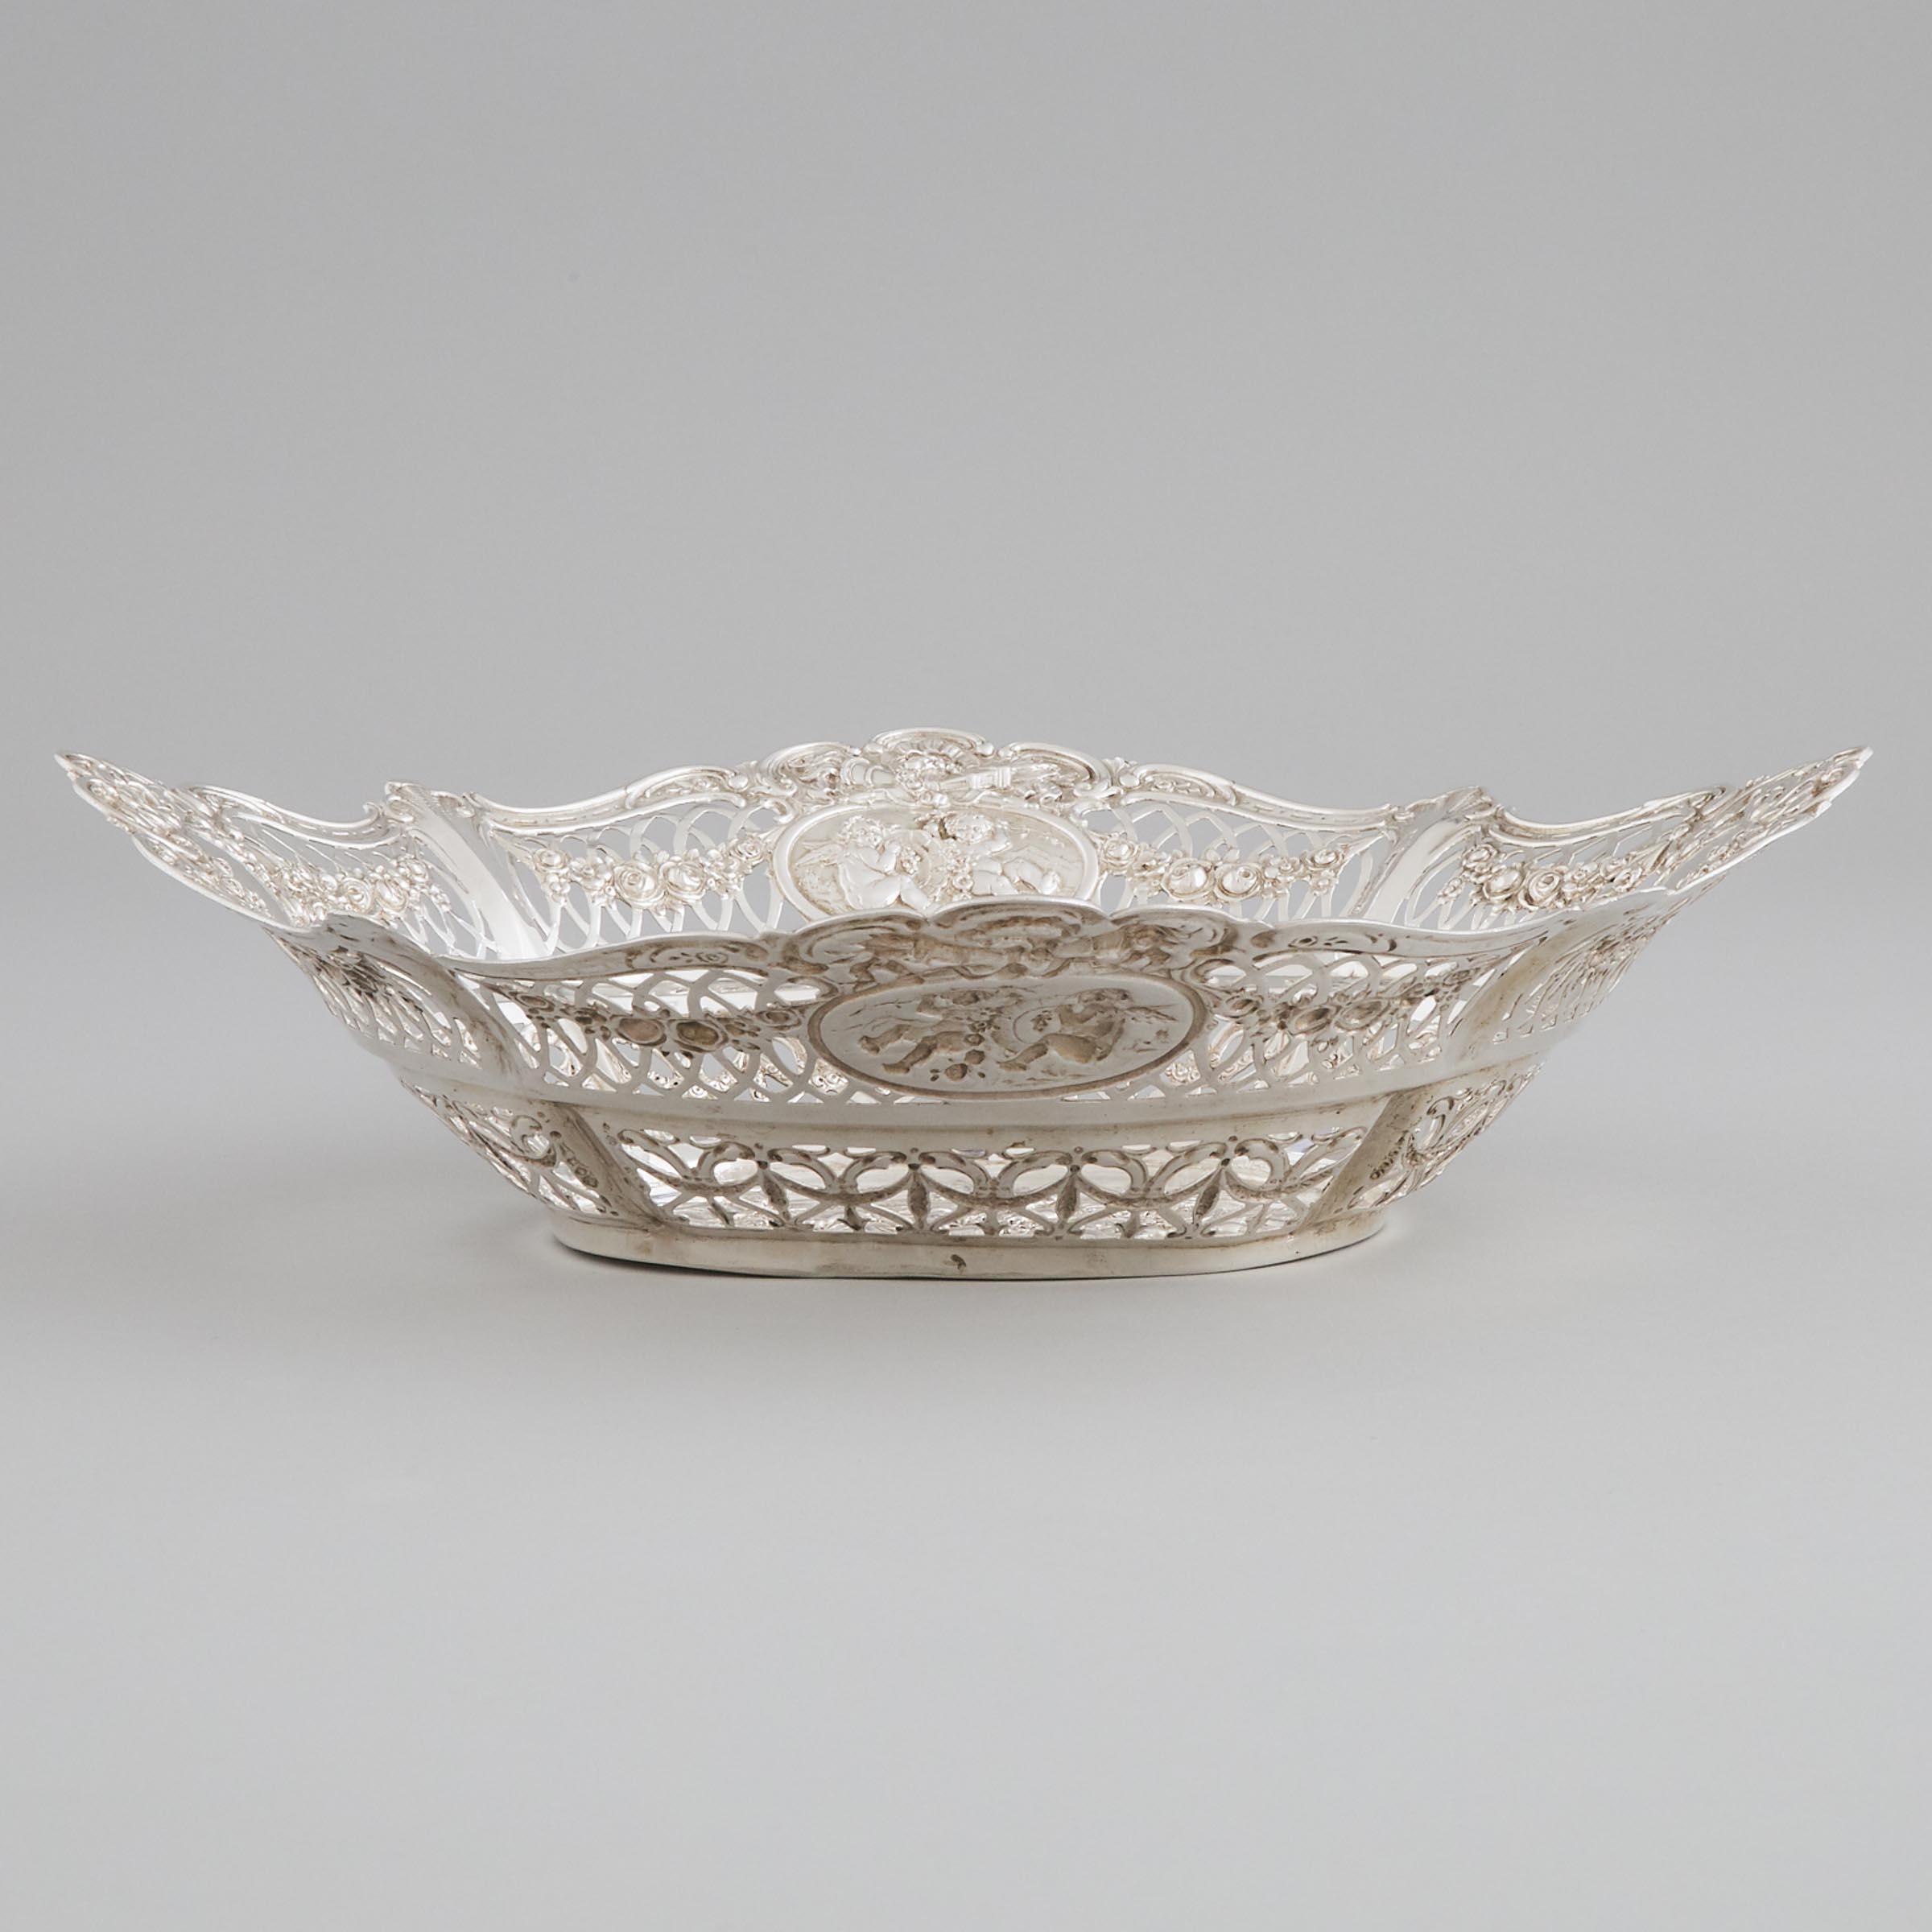 German Silver Shaped Oval Basket, early 20th century